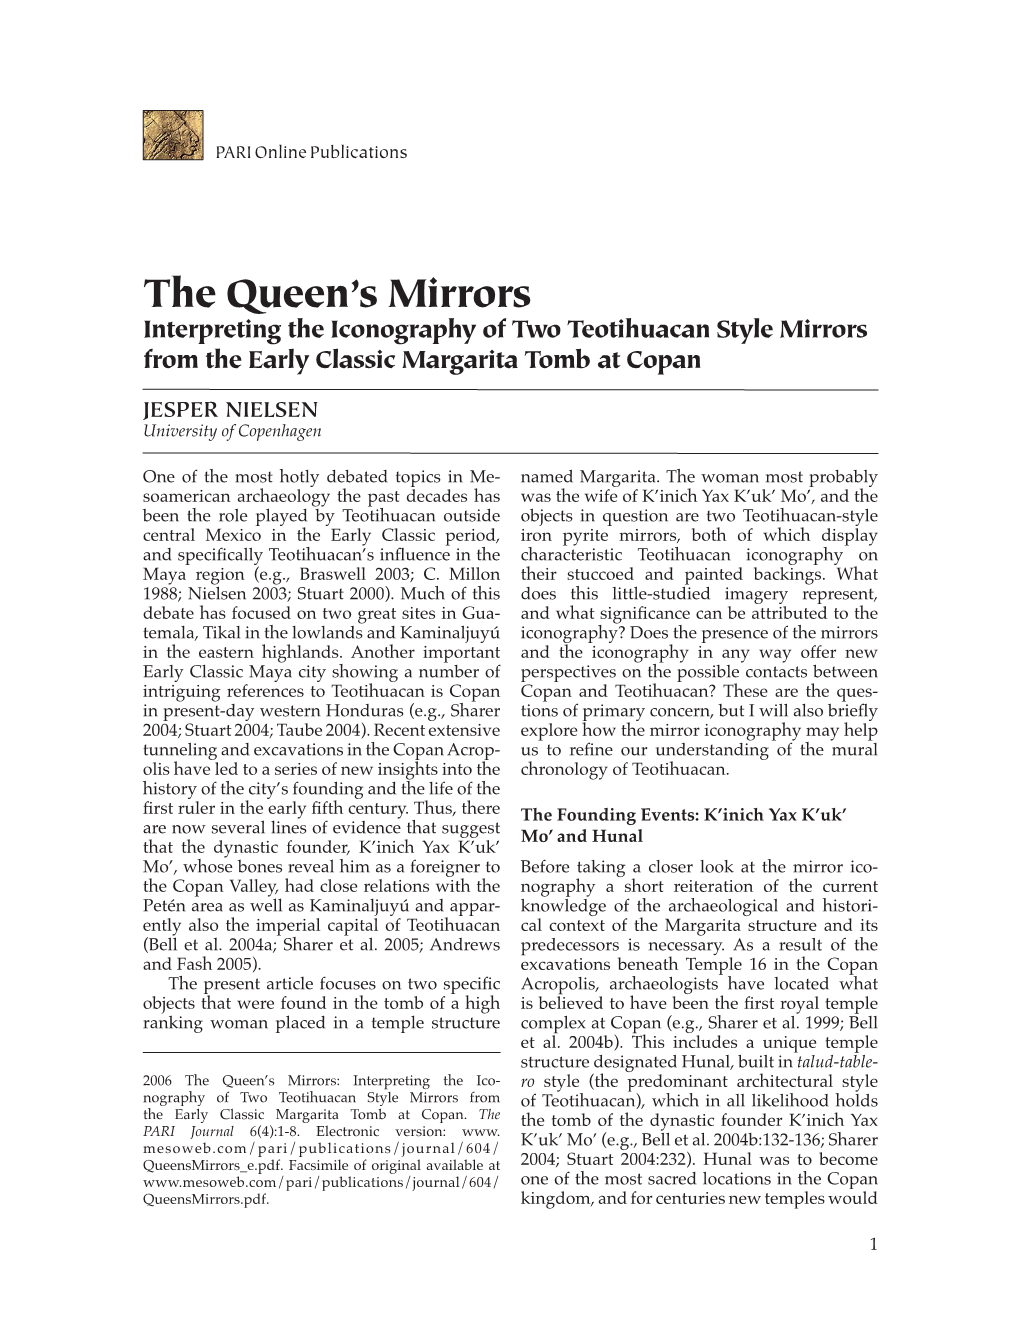 The Queen's Mirrors